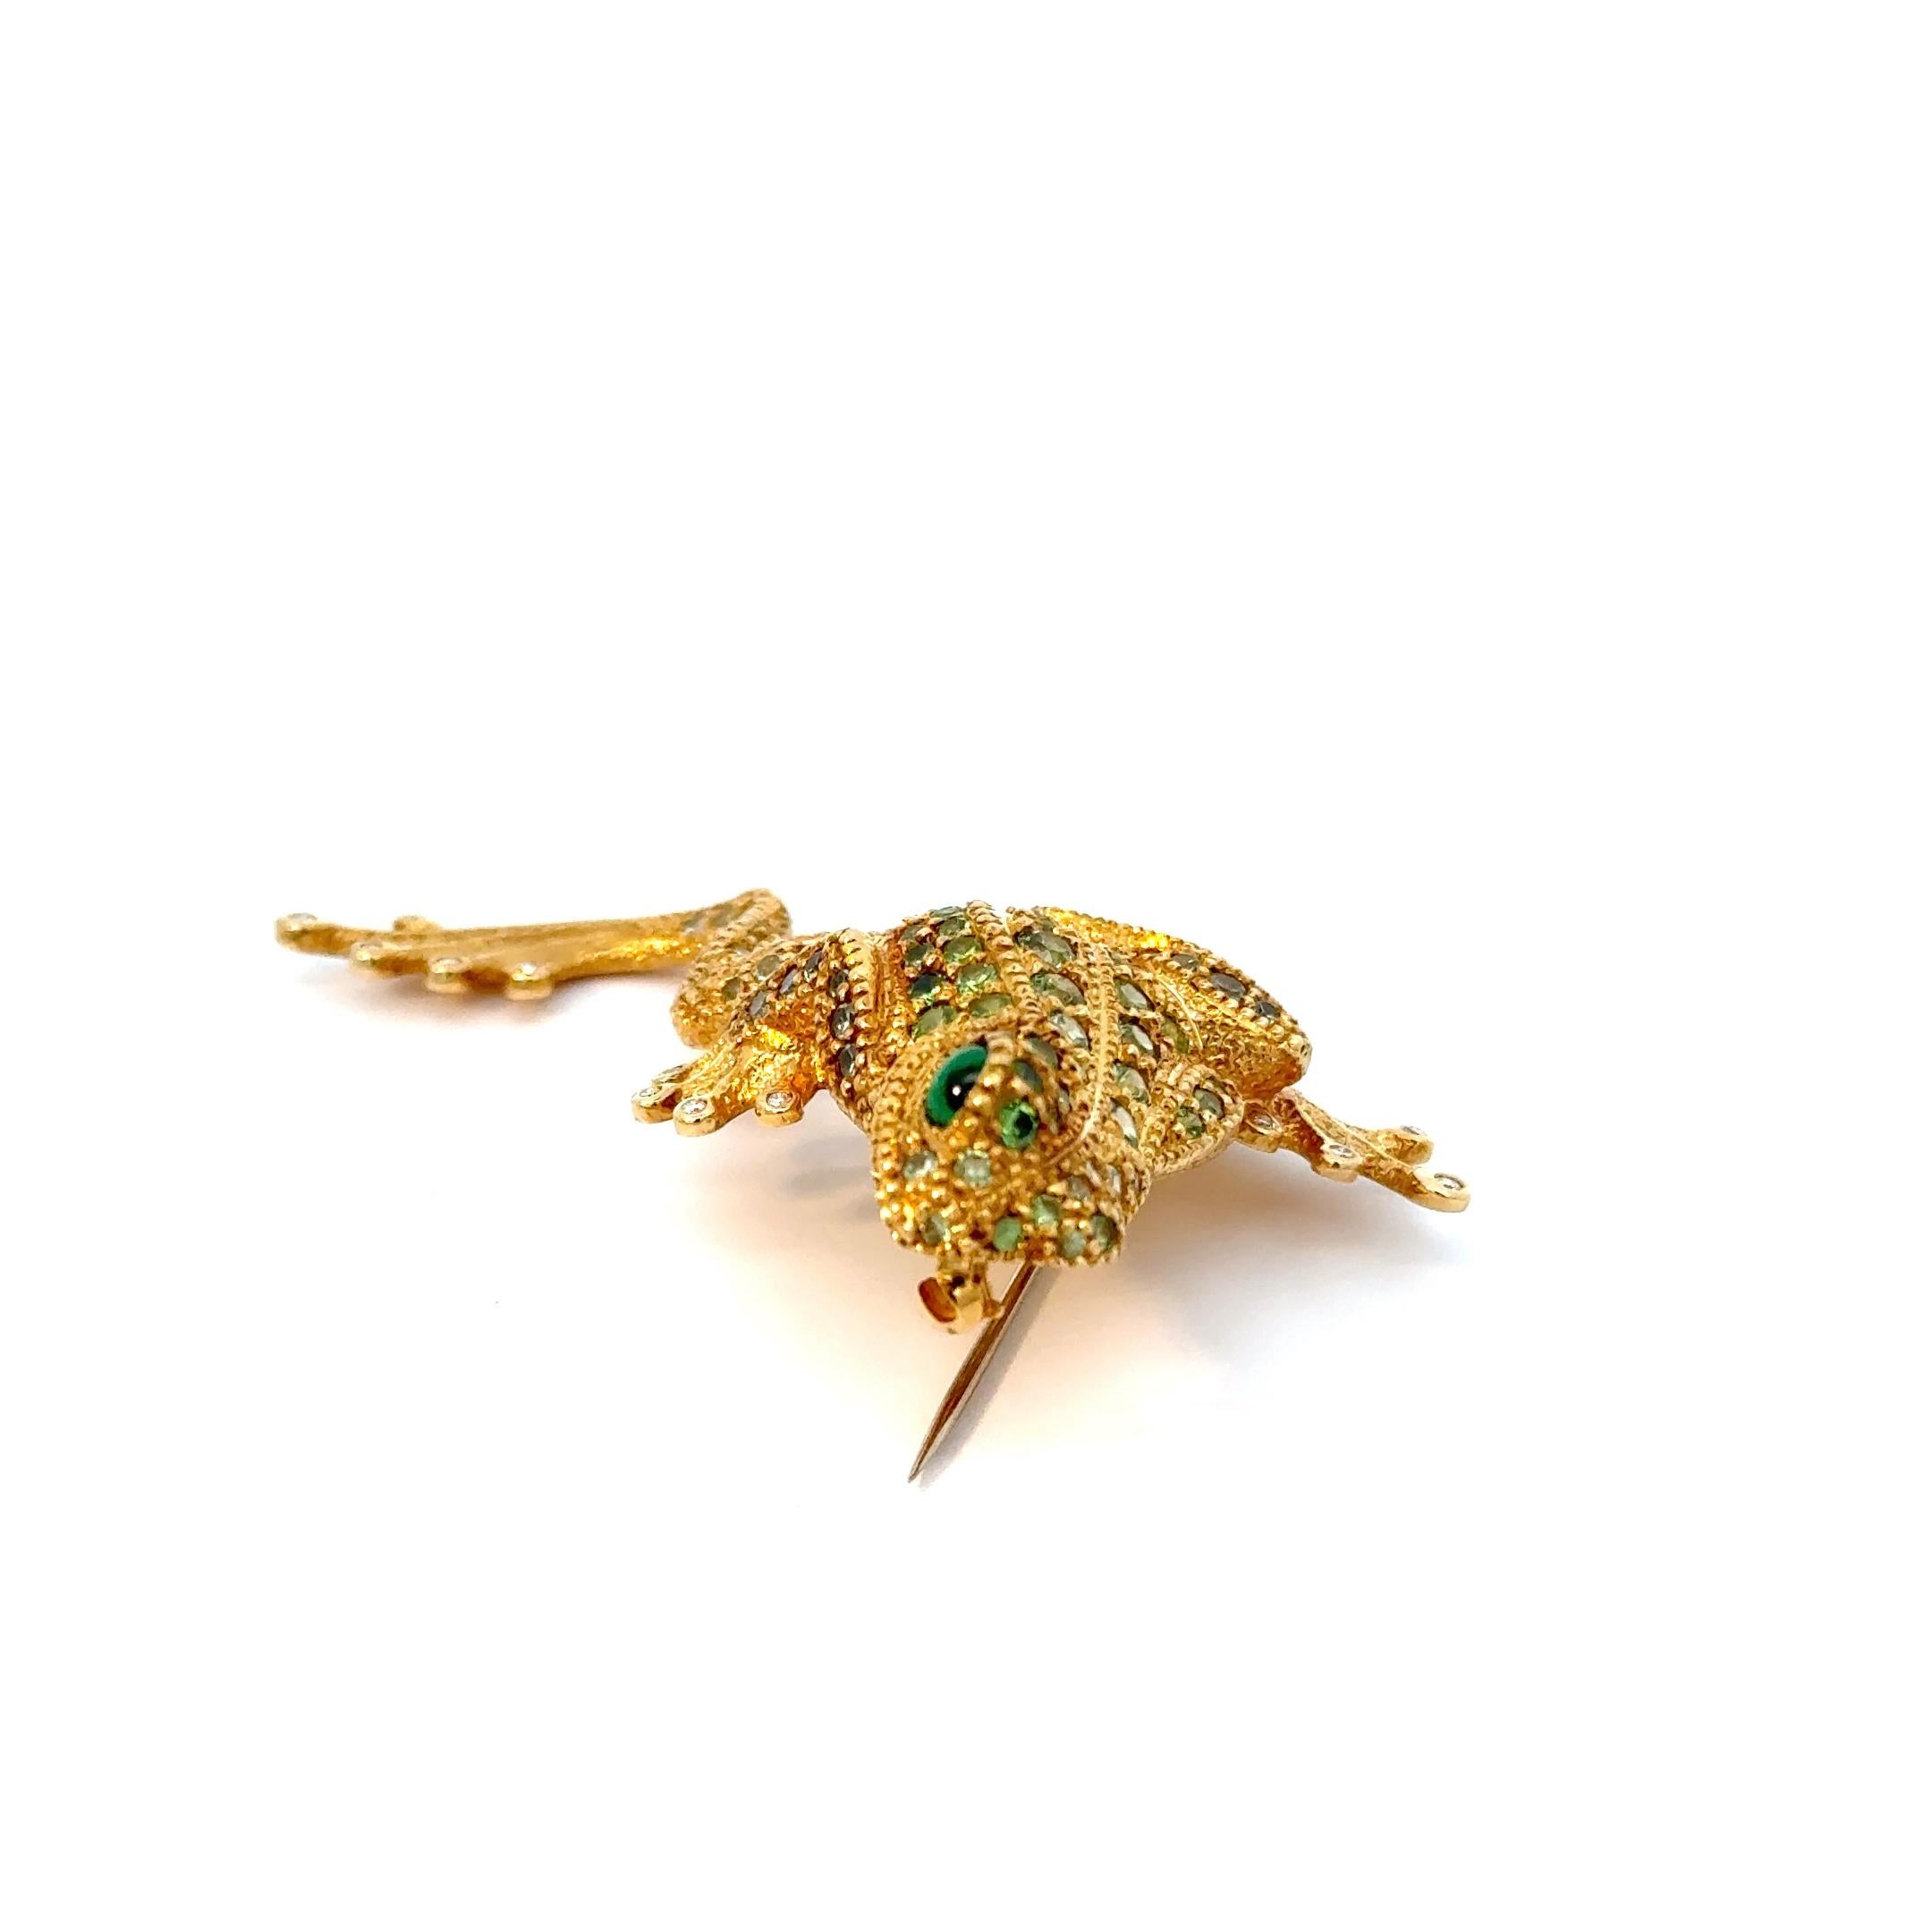 Designed by gemstone-carving-master Alfred Zimmermann, following his designs of his one of a kind gemstones carvings.
This unique frog brooch has been made in our own goldsmith workshop in Idar-Oberstein. The brooch was handmade in 18ct yellow gold,